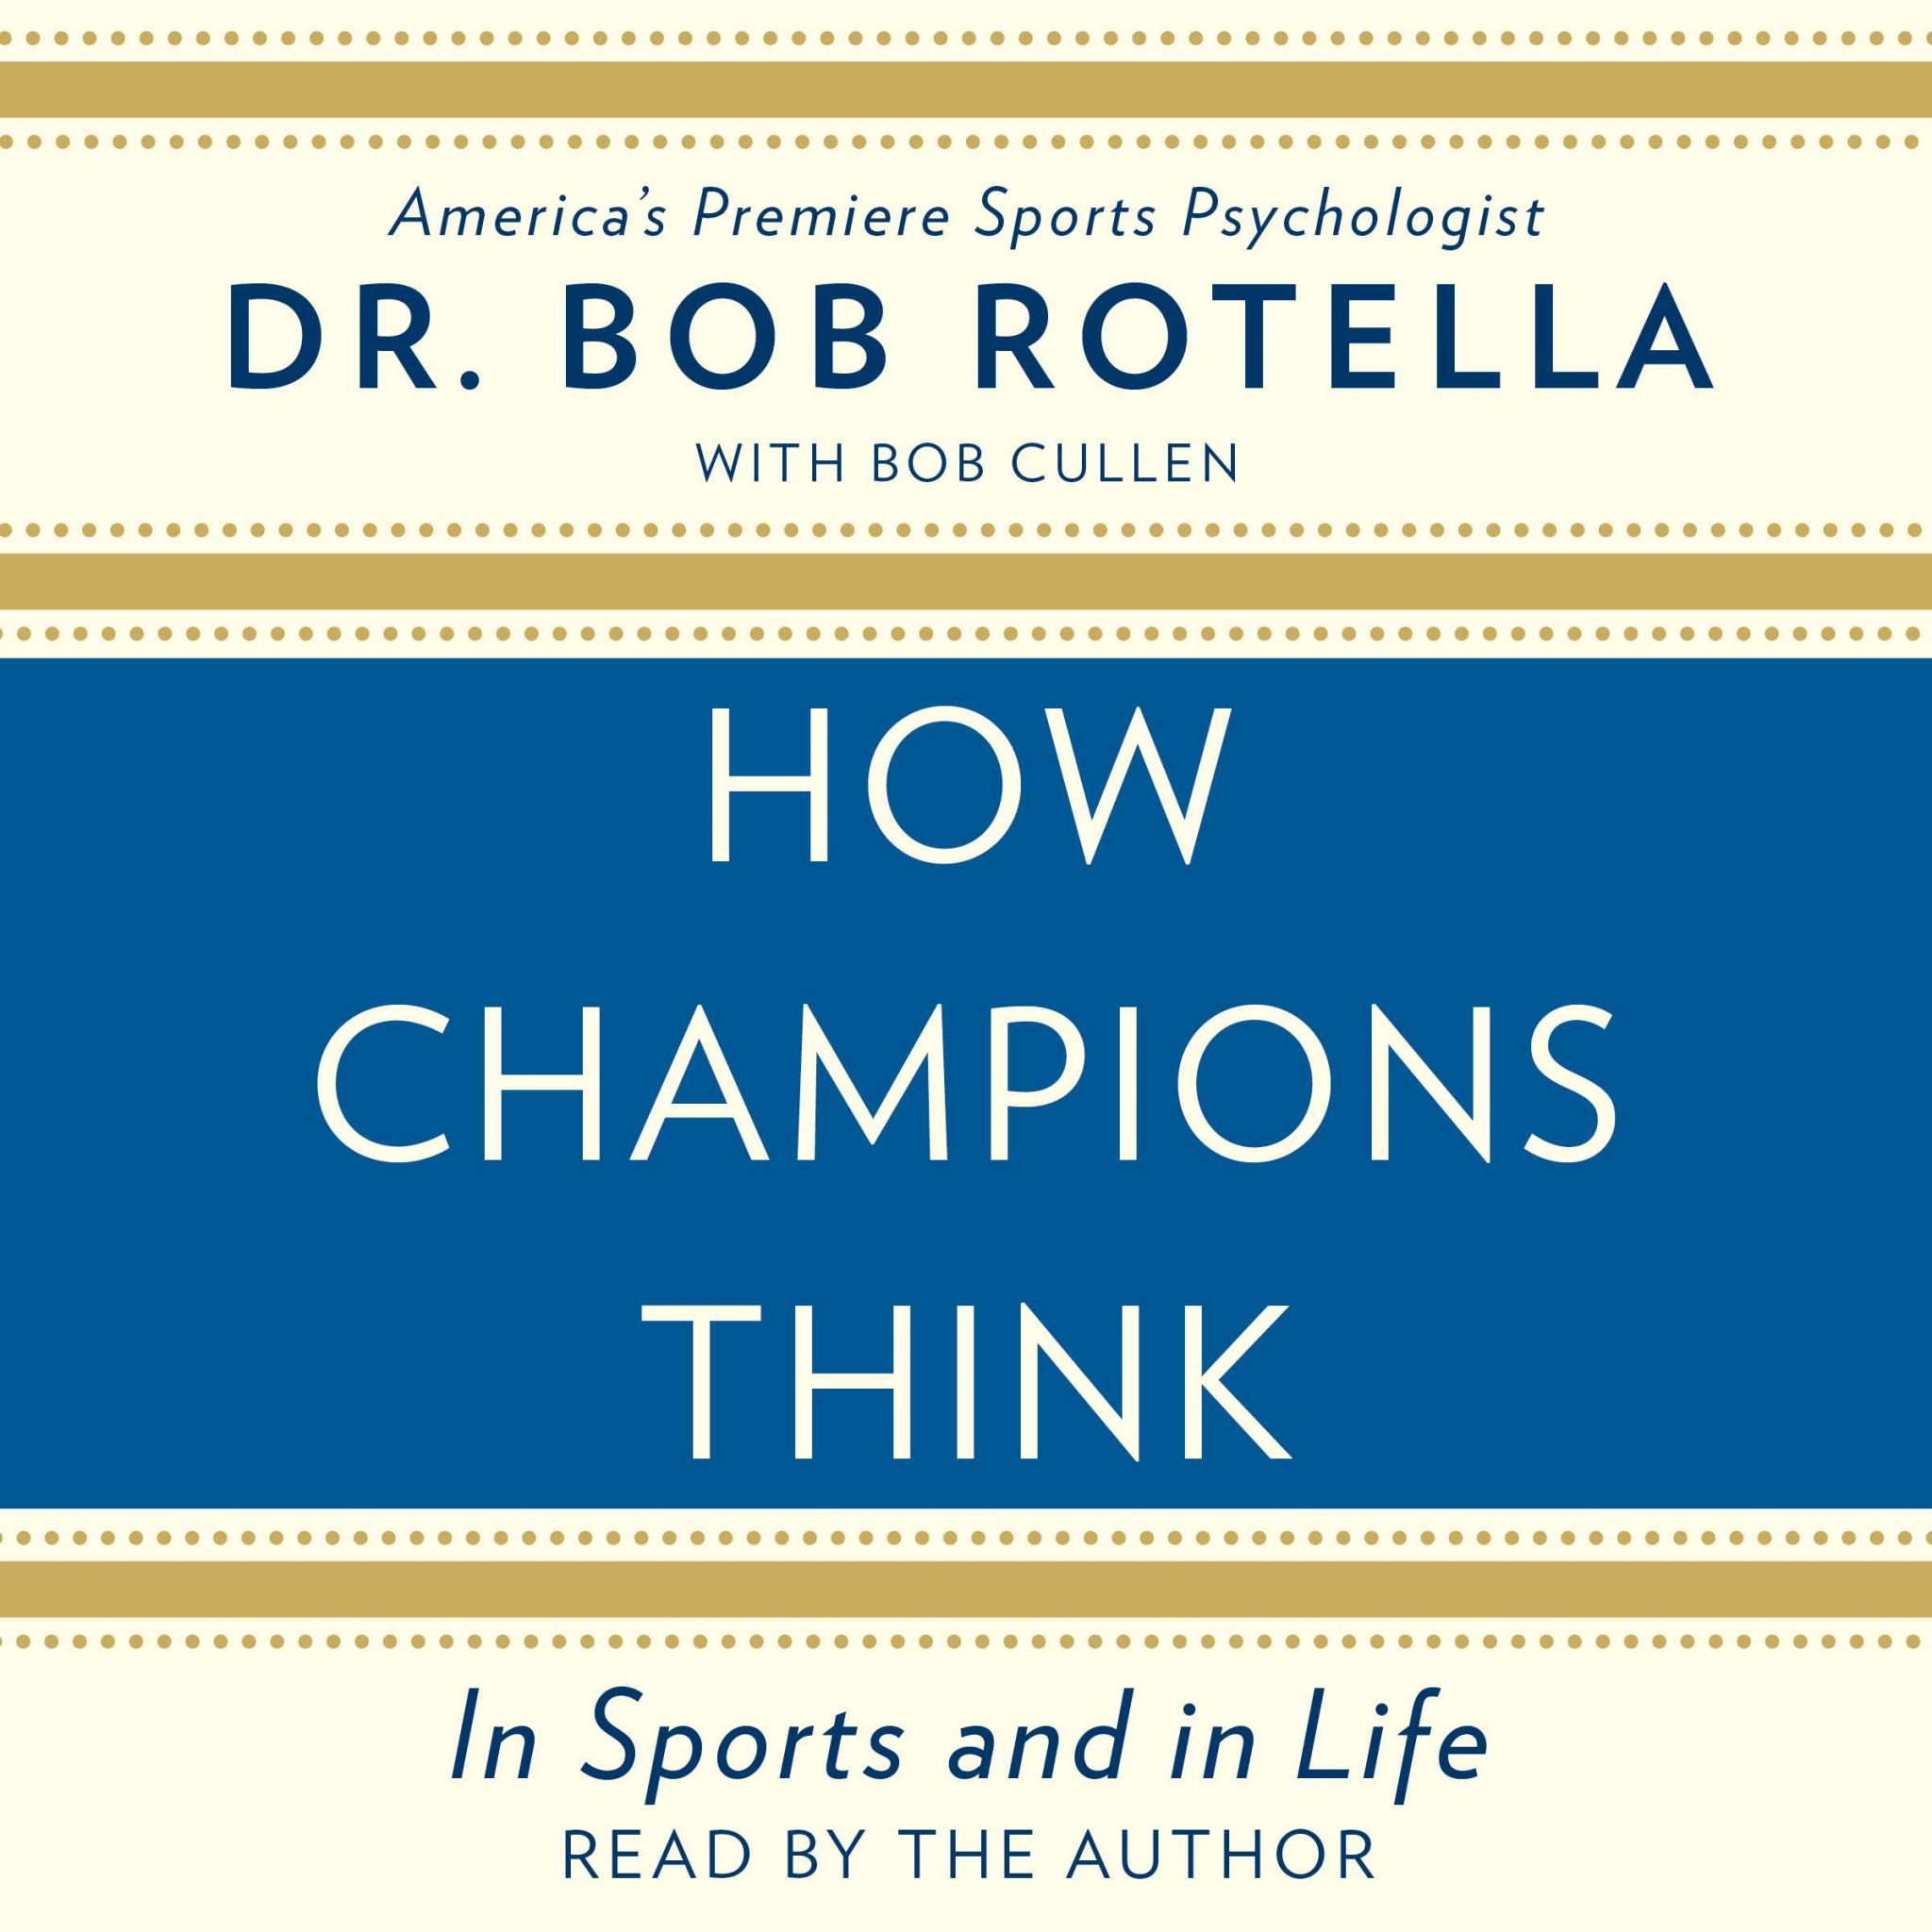 HOW CHAMPIONS THINK, BY DR. BOB ROTELLA